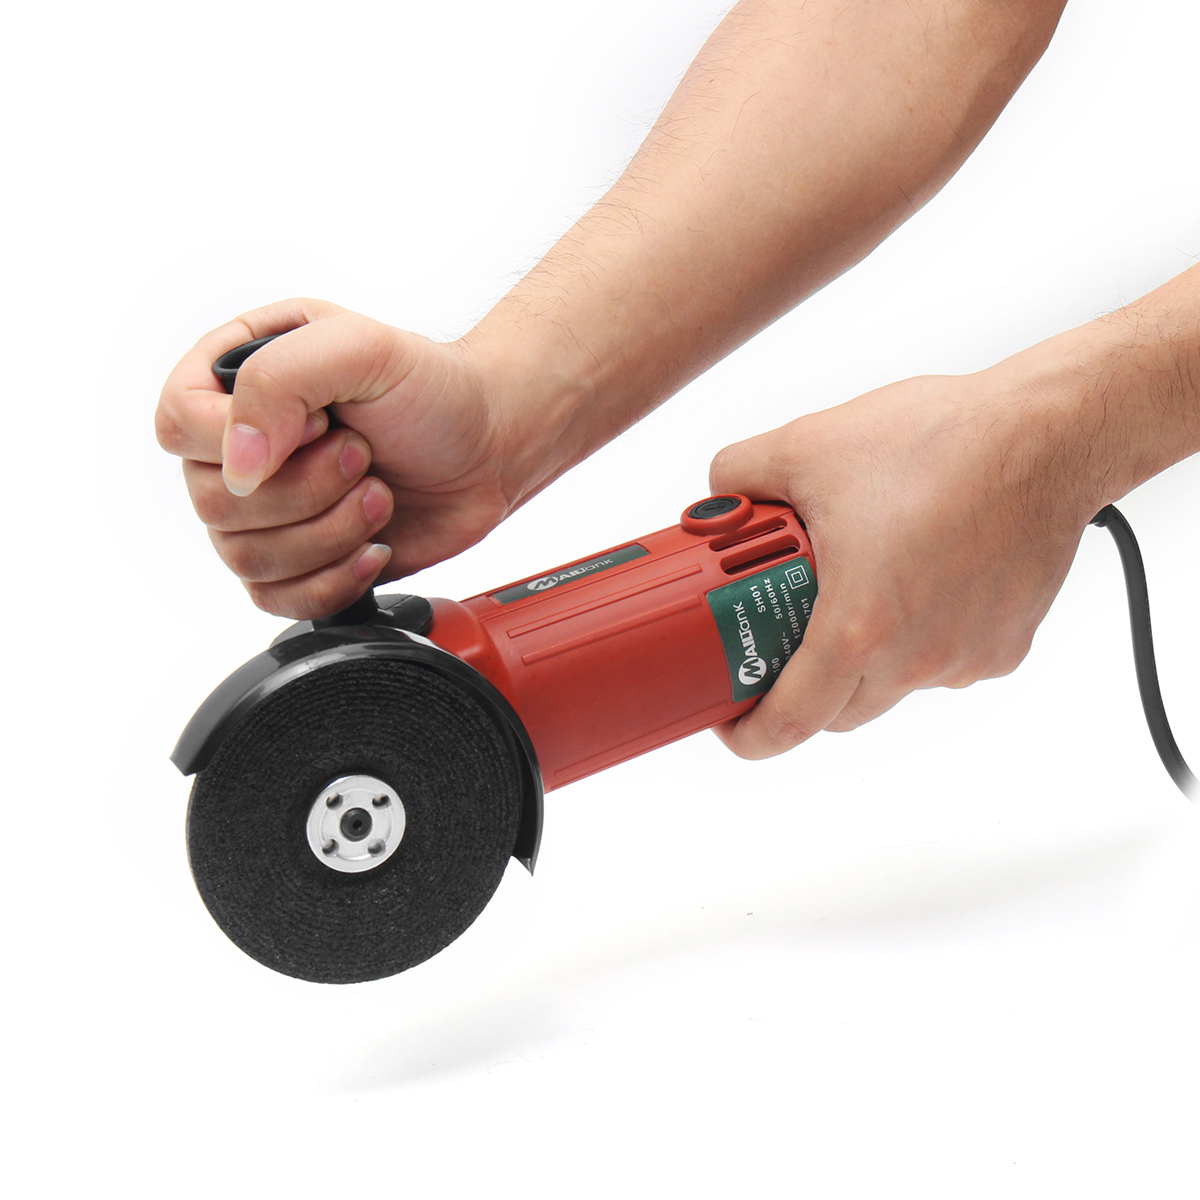 220V-600W-Multifunctional-Electric-Angle-Grinder-Polishing-Machine-Metal-Grinding-Cutter-Tool-1292095-5